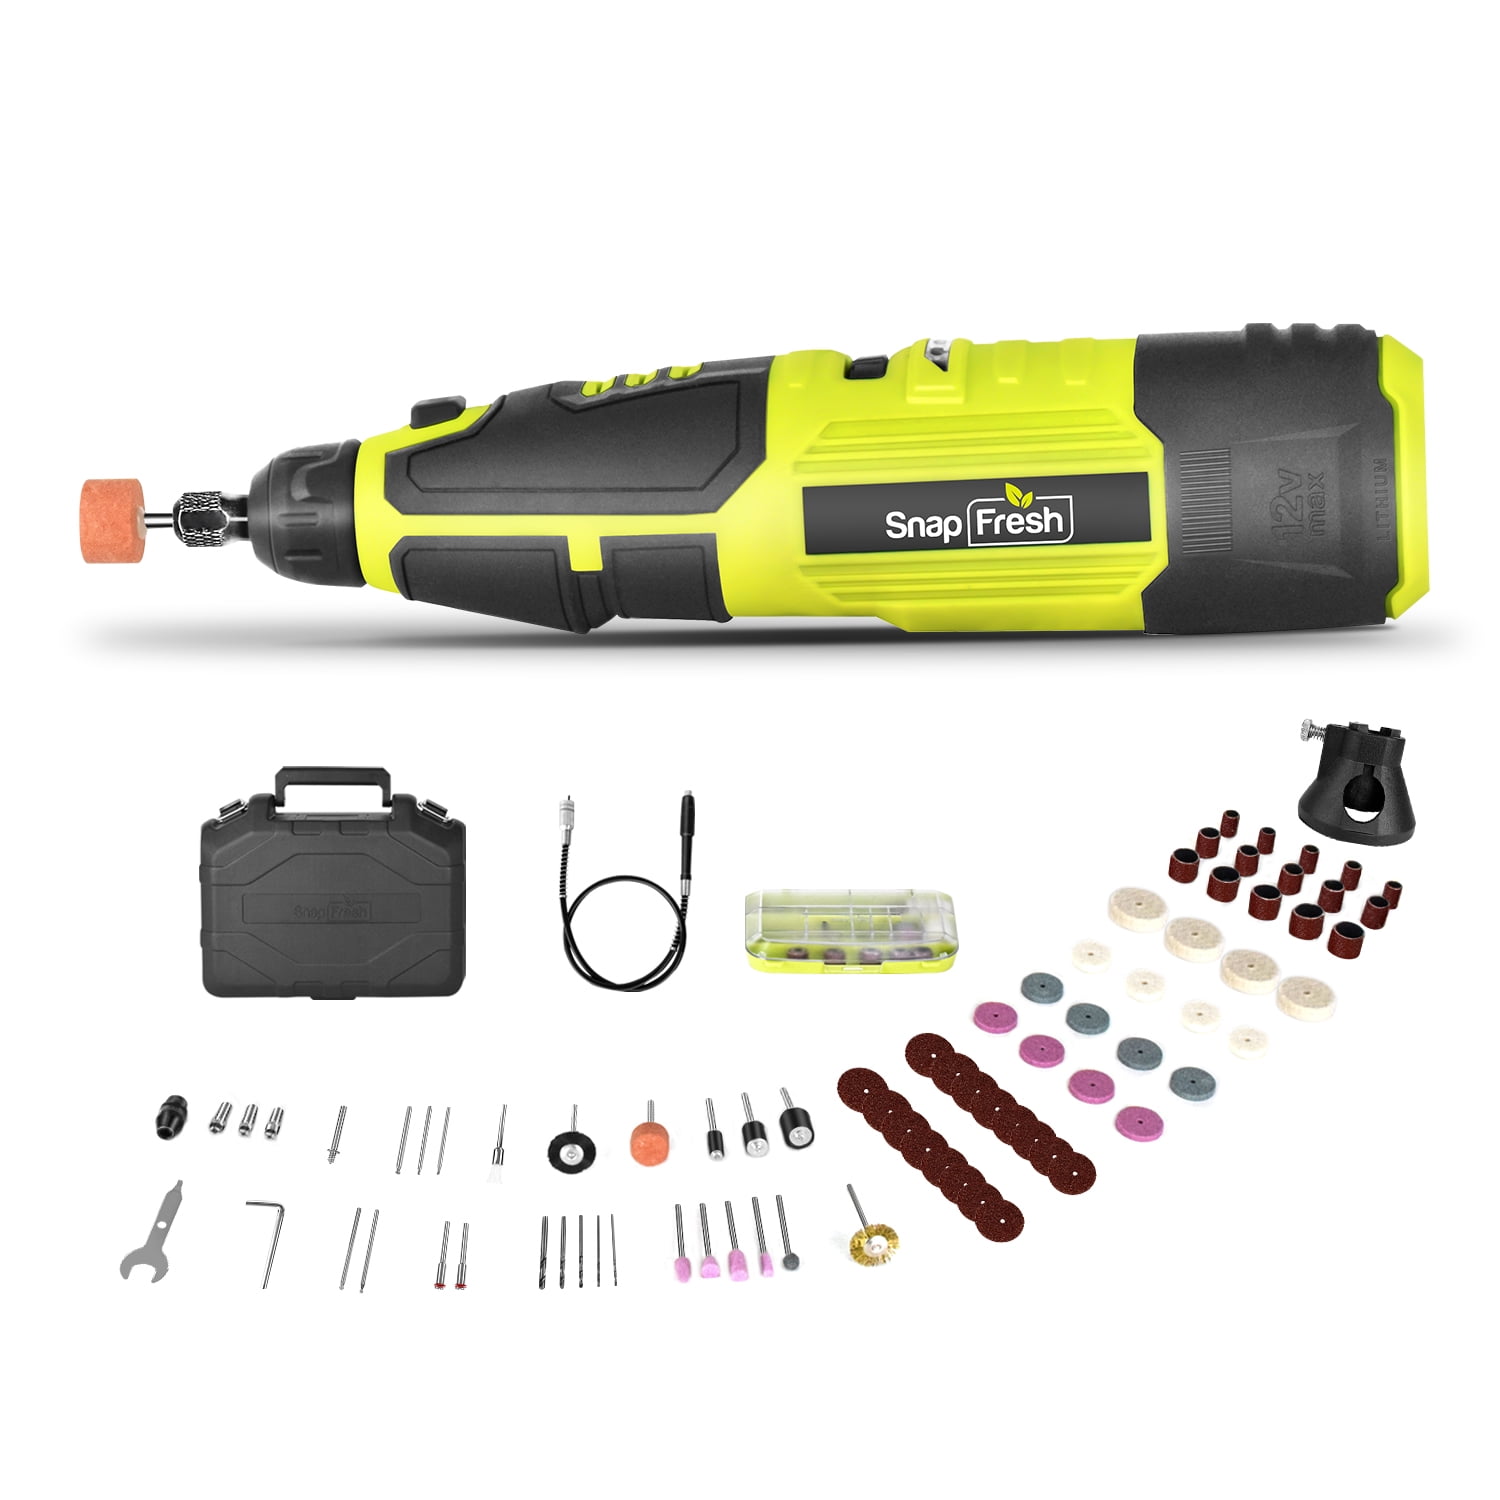 BENTISIM Rotary Tool Kit, 8000-35000 RPM Variable Speed Rotary Tool Kit  with A Universal Chuck, 5-Speed, 186 PCS Accessory Set for Grinding,  Sanding, Polishing, Milling, Carving, Cutting and Polishing 